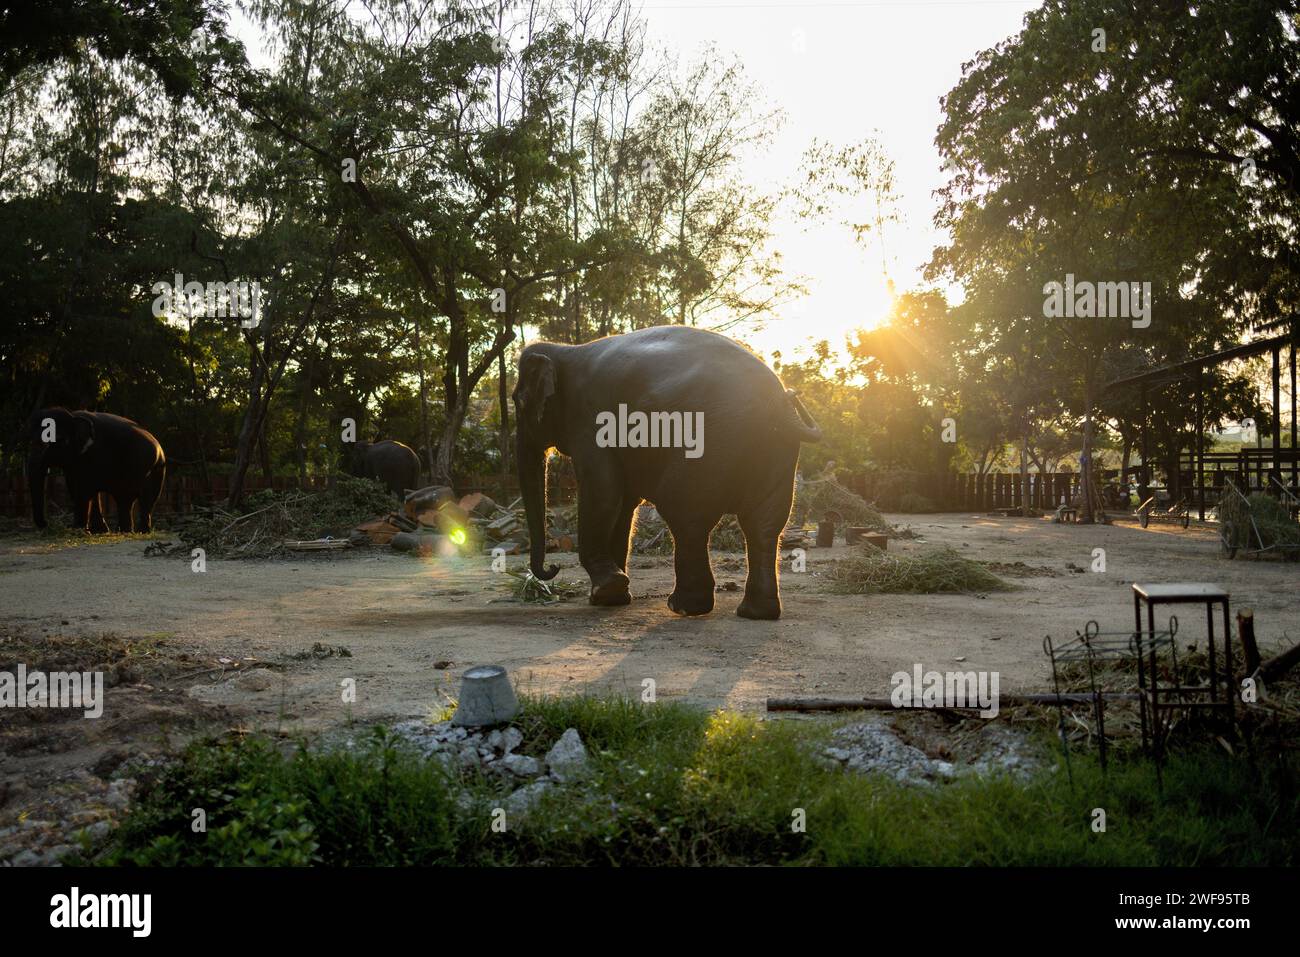 A large elephant stands proudly in a dirt field, showcasing its immense size and strength. Stock Photo